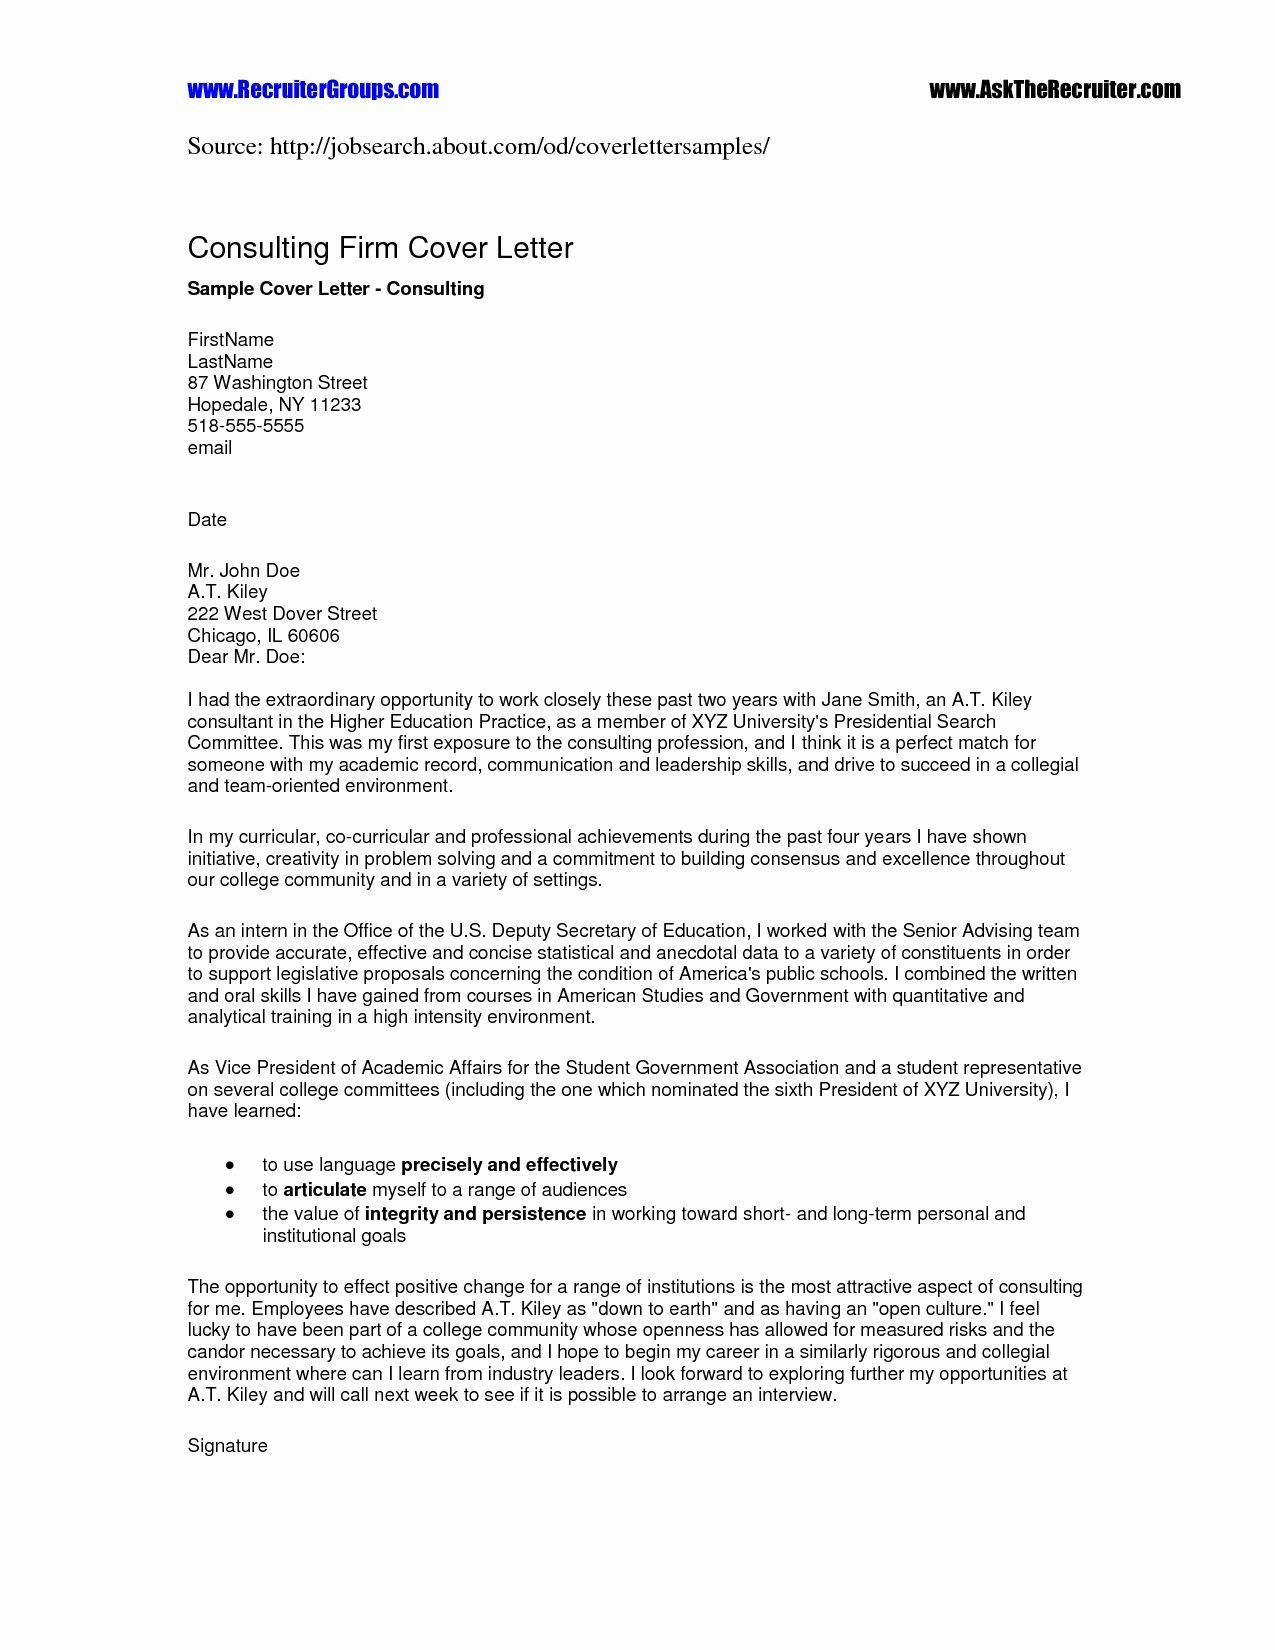 Free Cover Letter Template Microsoft Word - Resume and Cover Letter Templates Fresh Teacher Cover Letter